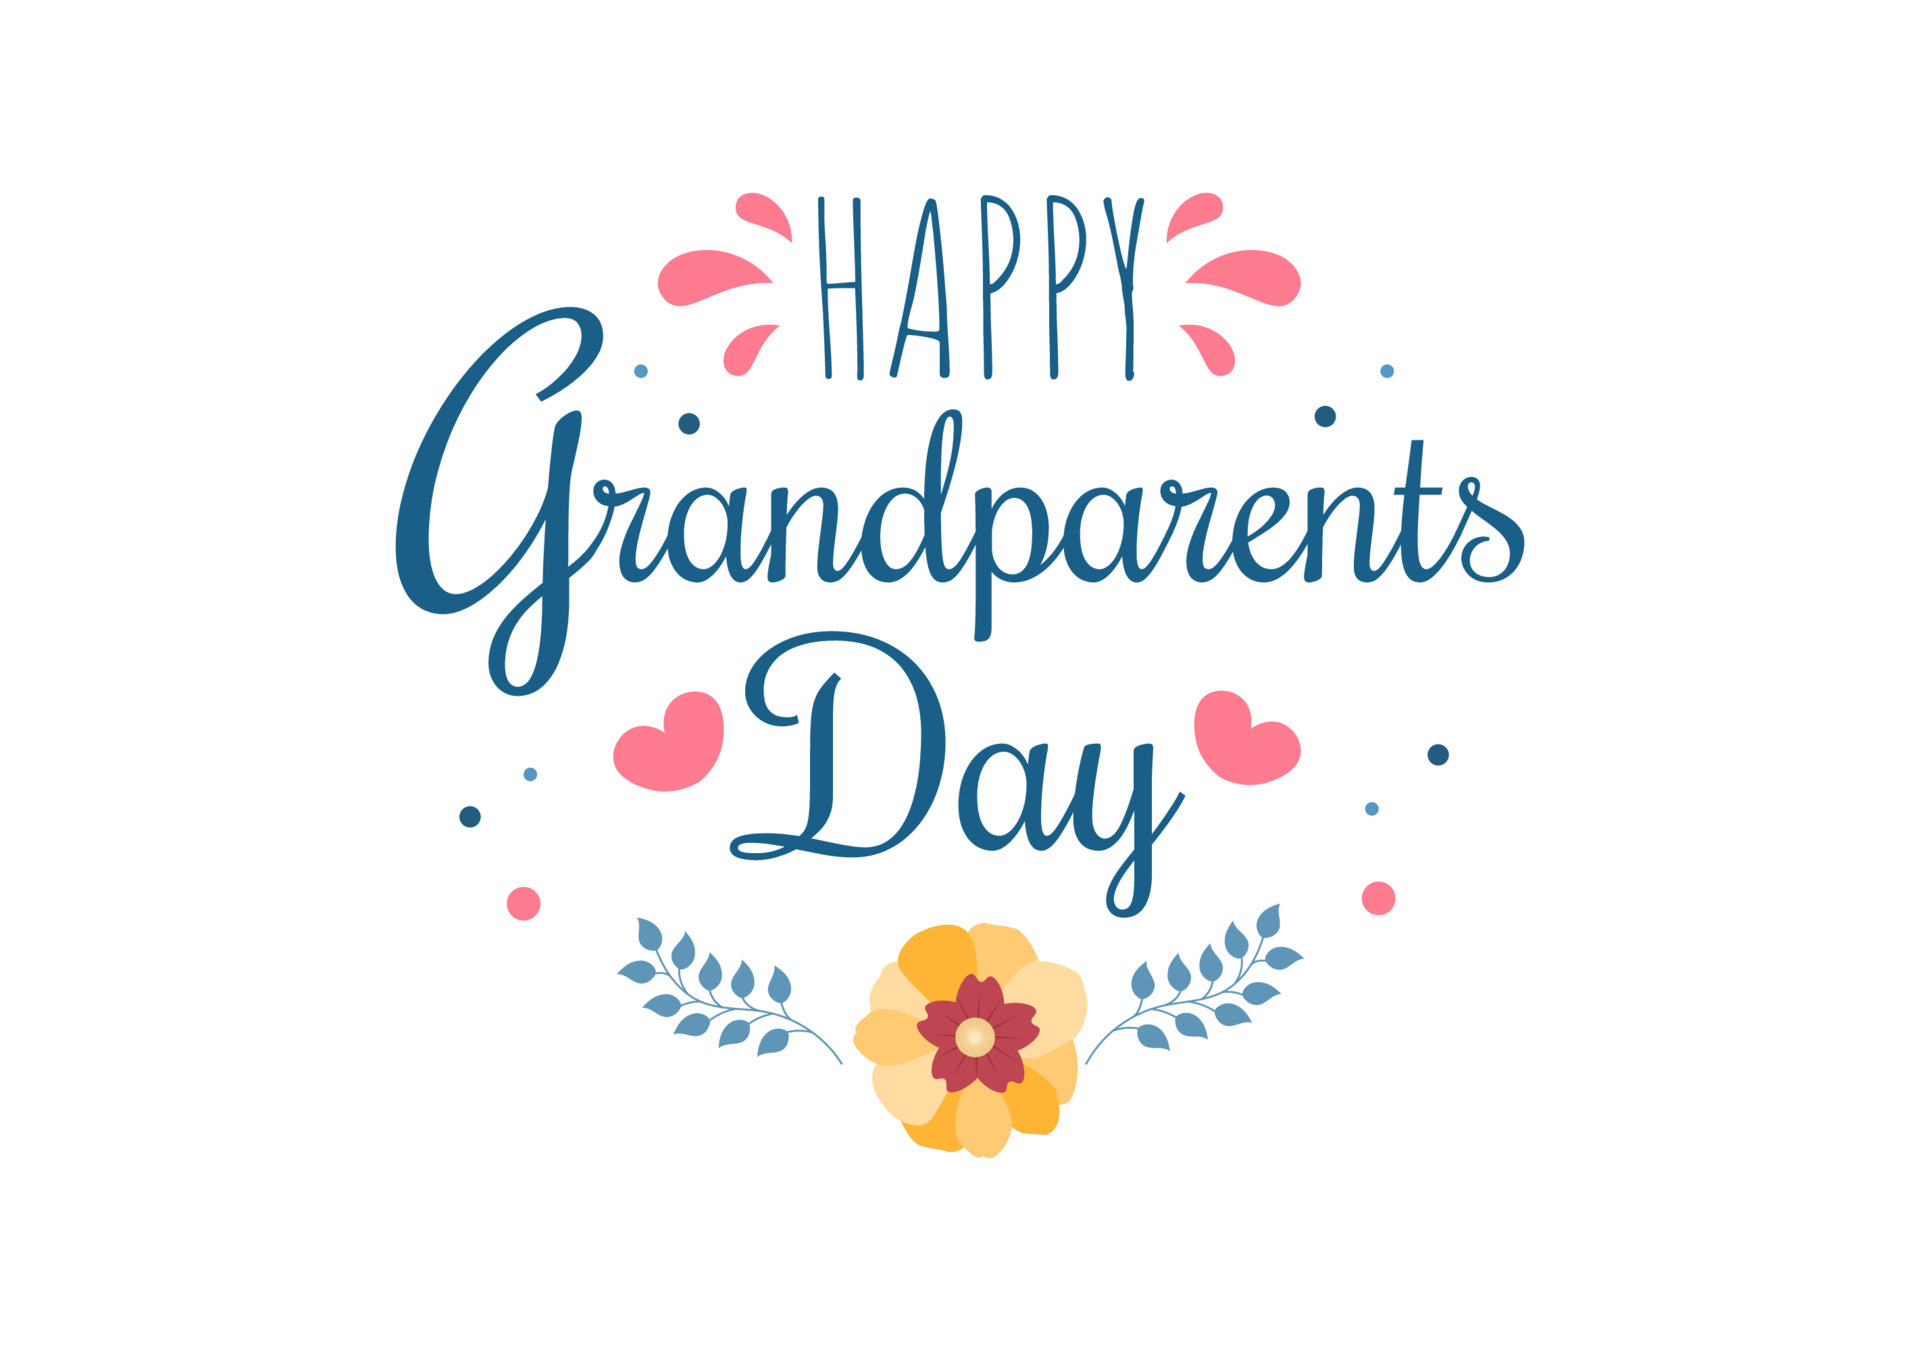 Happy Grandparents Day Cute Cartoon Illustration with Flower Decoration